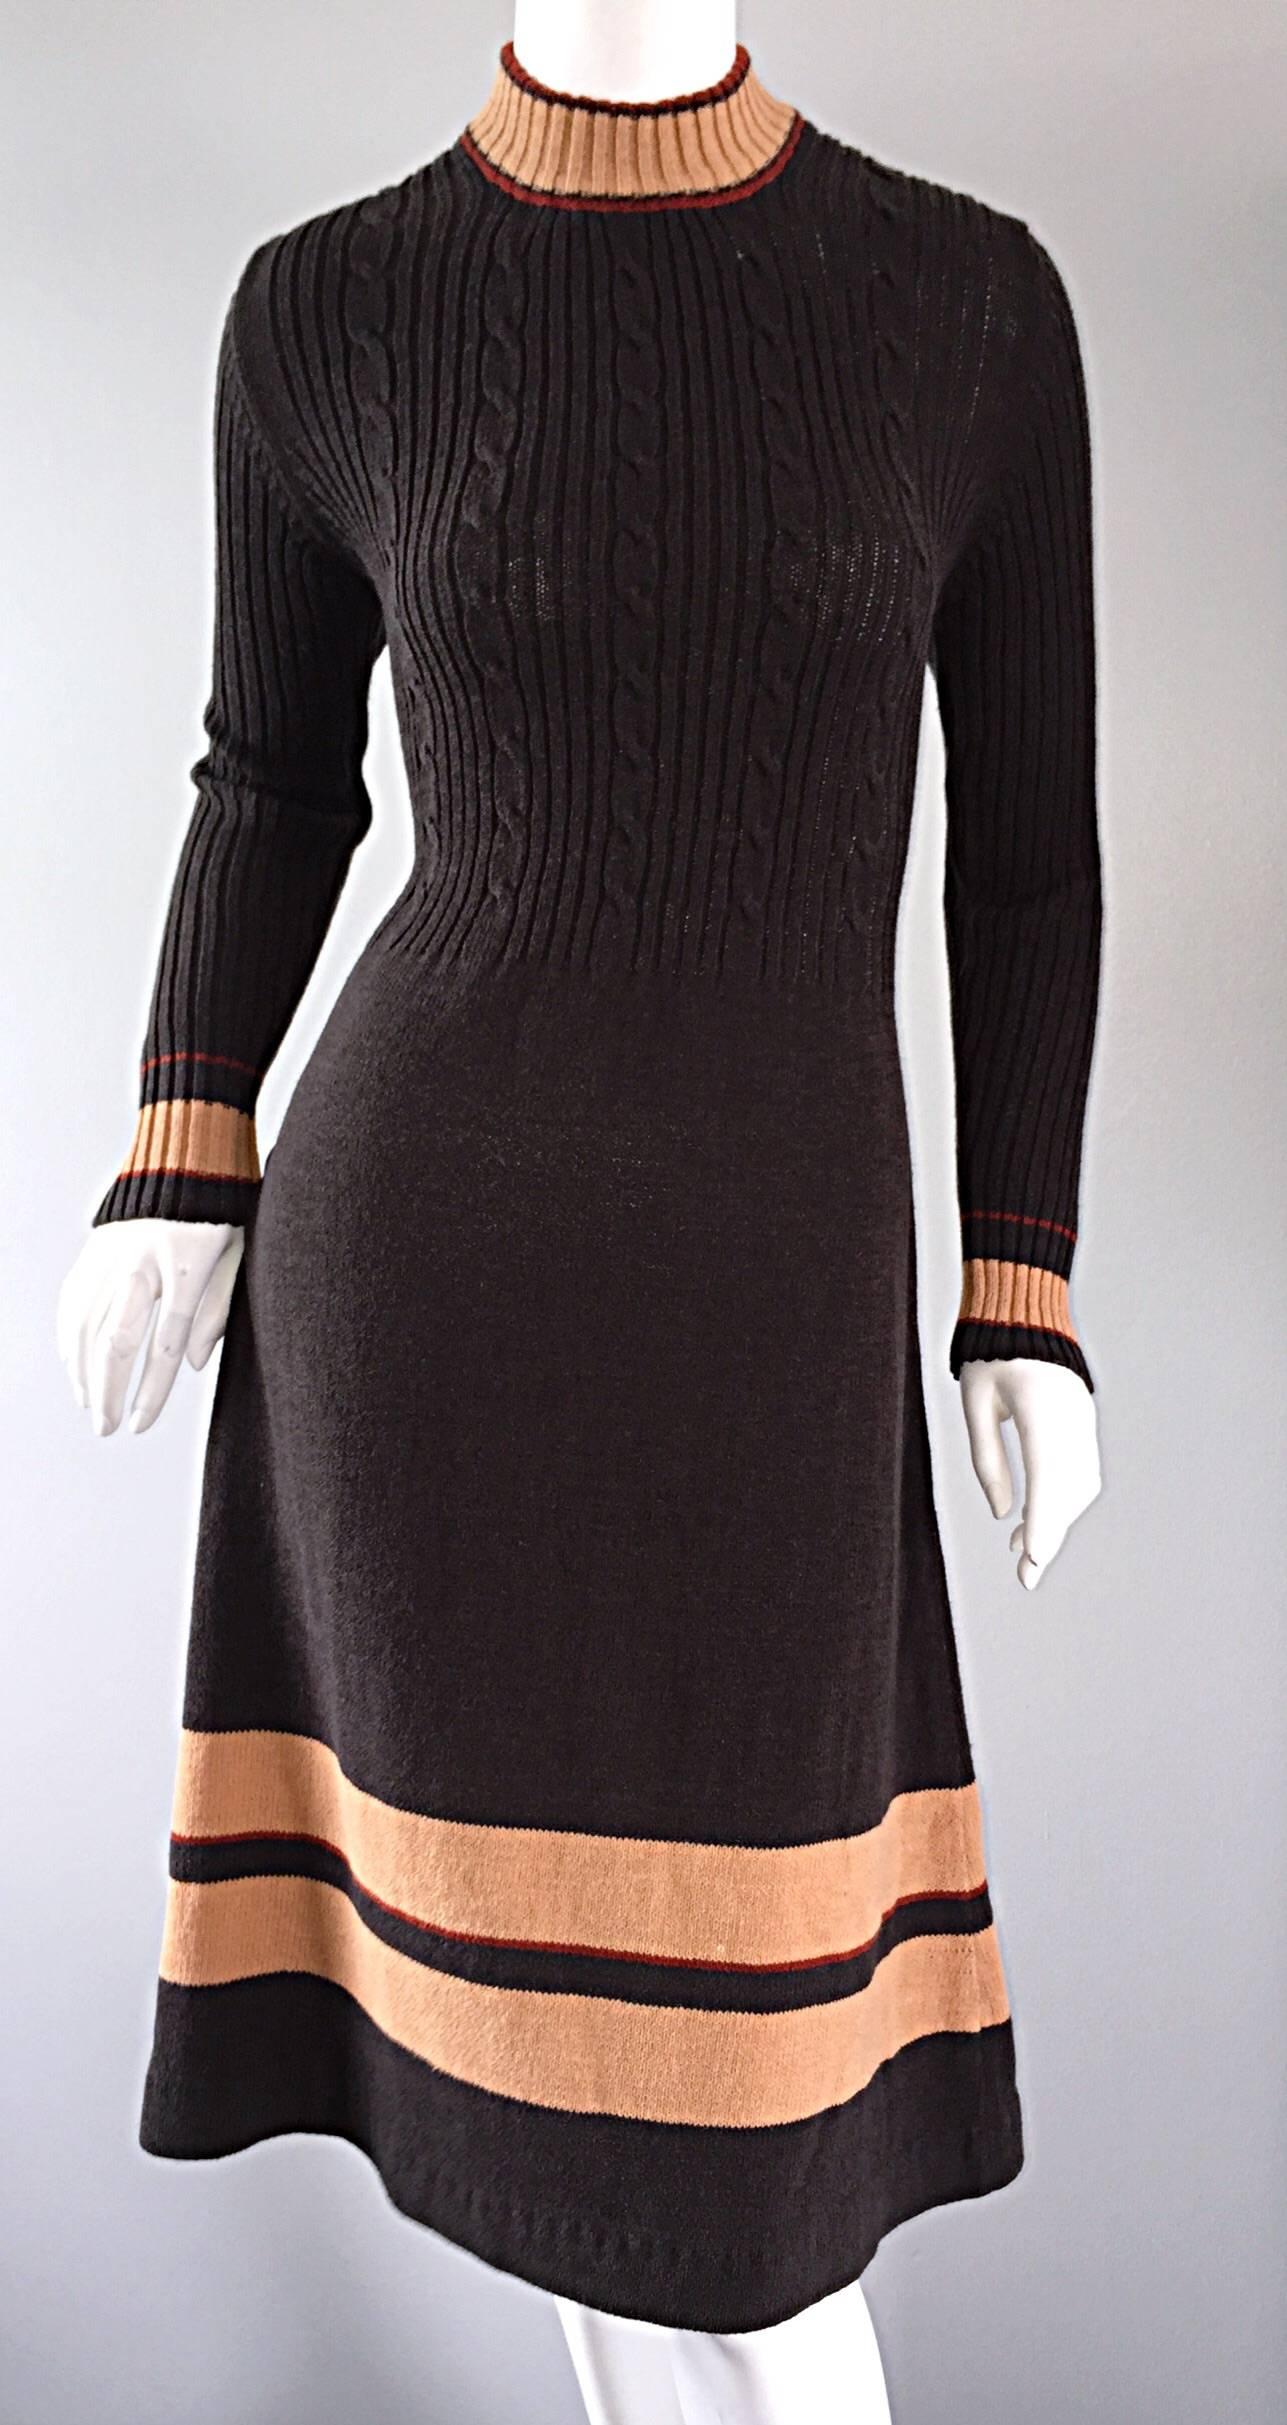 Chic 60s Judy Wayne 60s sweater dress! Ribbed, with camel and maroon stripes at collar, hem, and cuffs. A-Line shape makes for a very flattering look. Tailored long sleeves, with hidden zipper in back. Easily transitions from day to night. Great